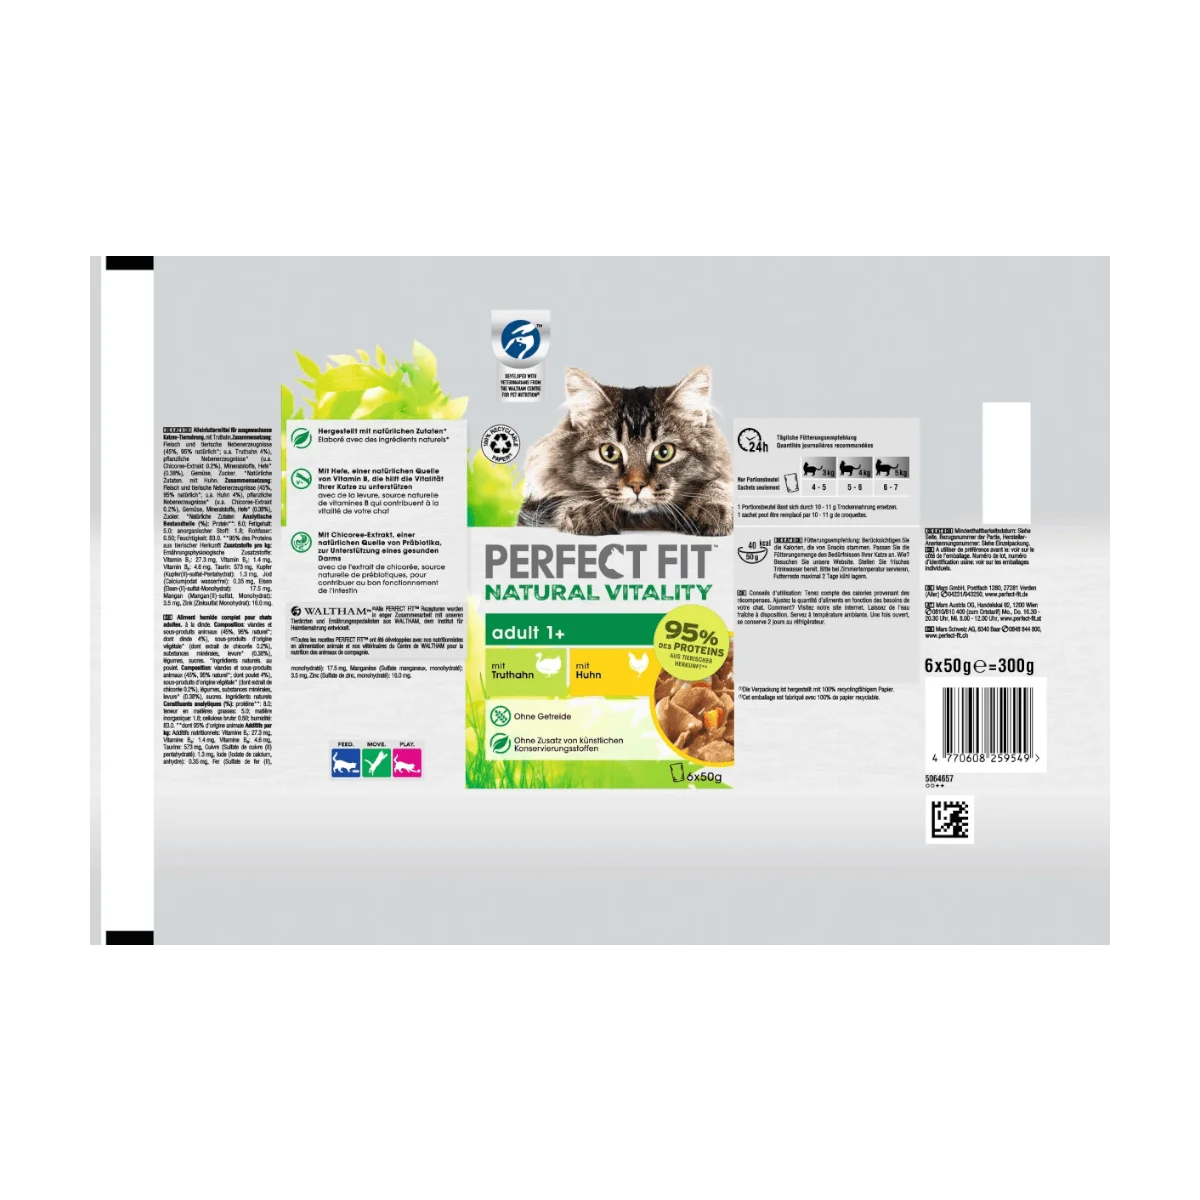 PERFECT FIT Nassfutter Katze mit Huhn & Truthahn, natural vitality, Multipack (6x50 g), 300 g